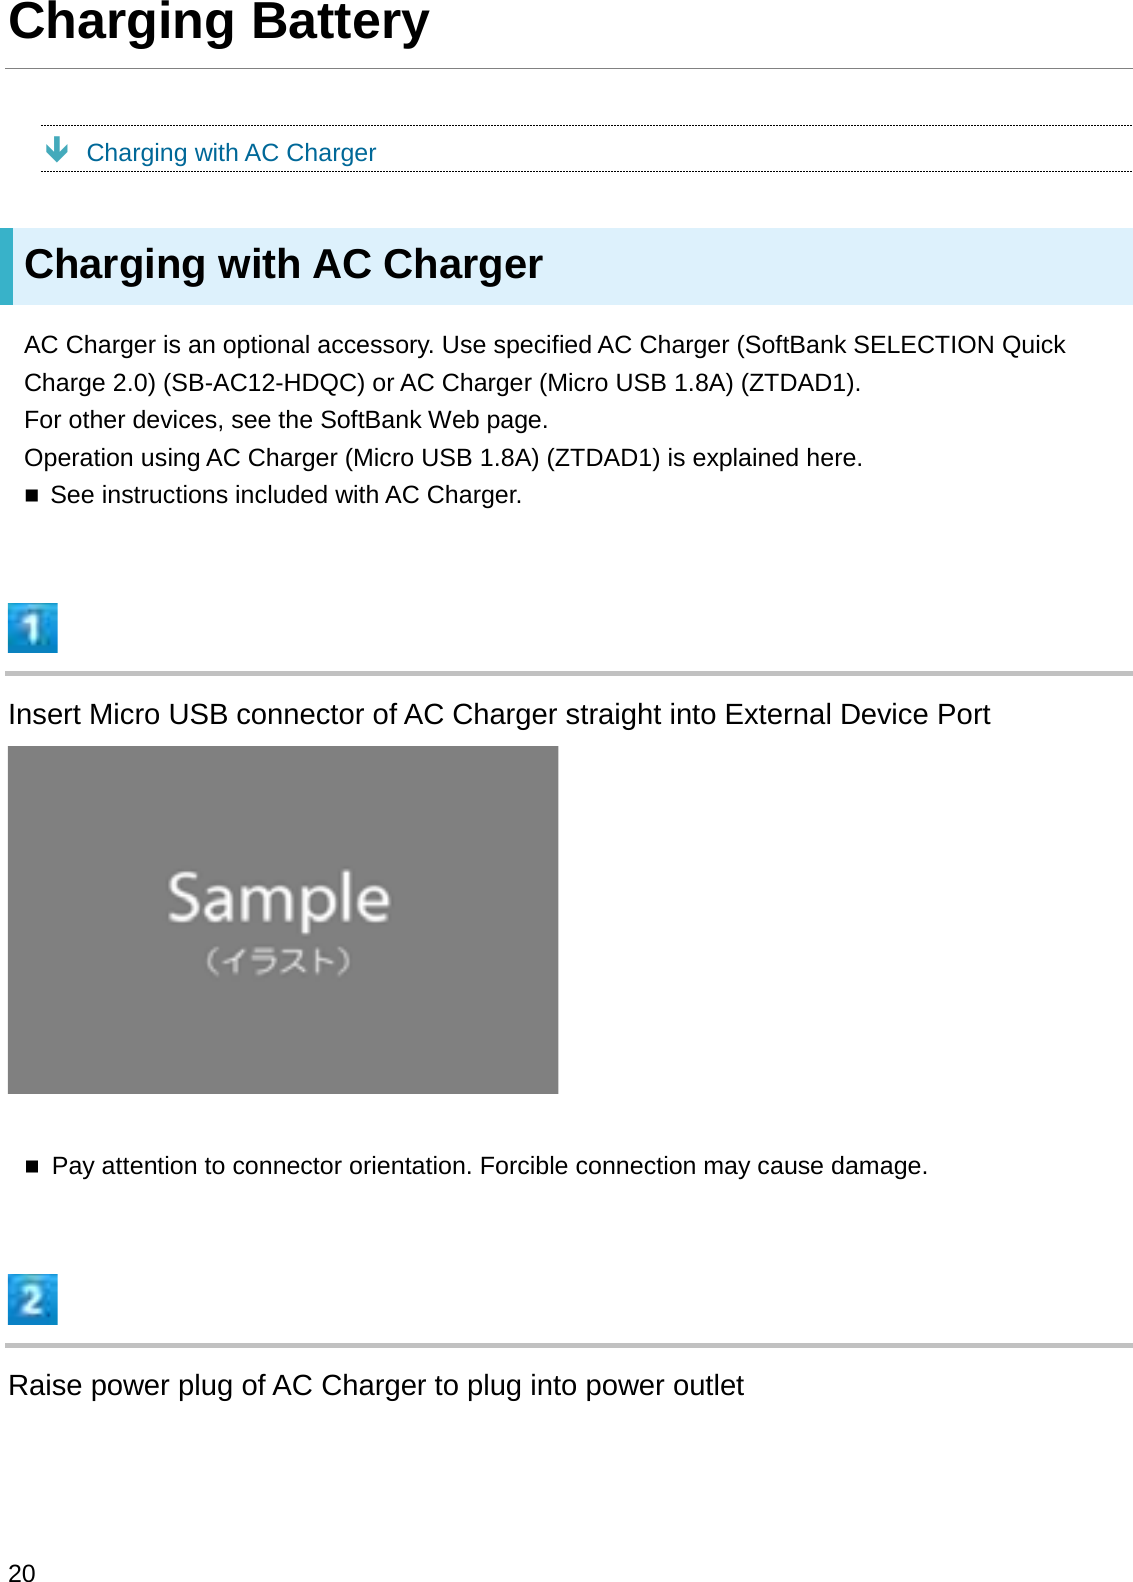 Charging BatteryÐCharging with AC ChargerCharging with AC ChargerAC Charger is an optional accessory. Use specified AC Charger (SoftBank SELECTION Quick Charge 2.0) (SB-AC12-HDQC) or AC Charger (Micro USB 1.8A) (ZTDAD1).For other devices, see the SoftBank Web page.Operation using AC Charger (Micro USB 1.8A) (ZTDAD1) is explained here.See instructions included with AC Charger.Insert Micro USB connector of AC Charger straight into External Device PortPay attention to connector orientation. Forcible connection may cause damage.Raise power plug of AC Charger to plug into power outlet20